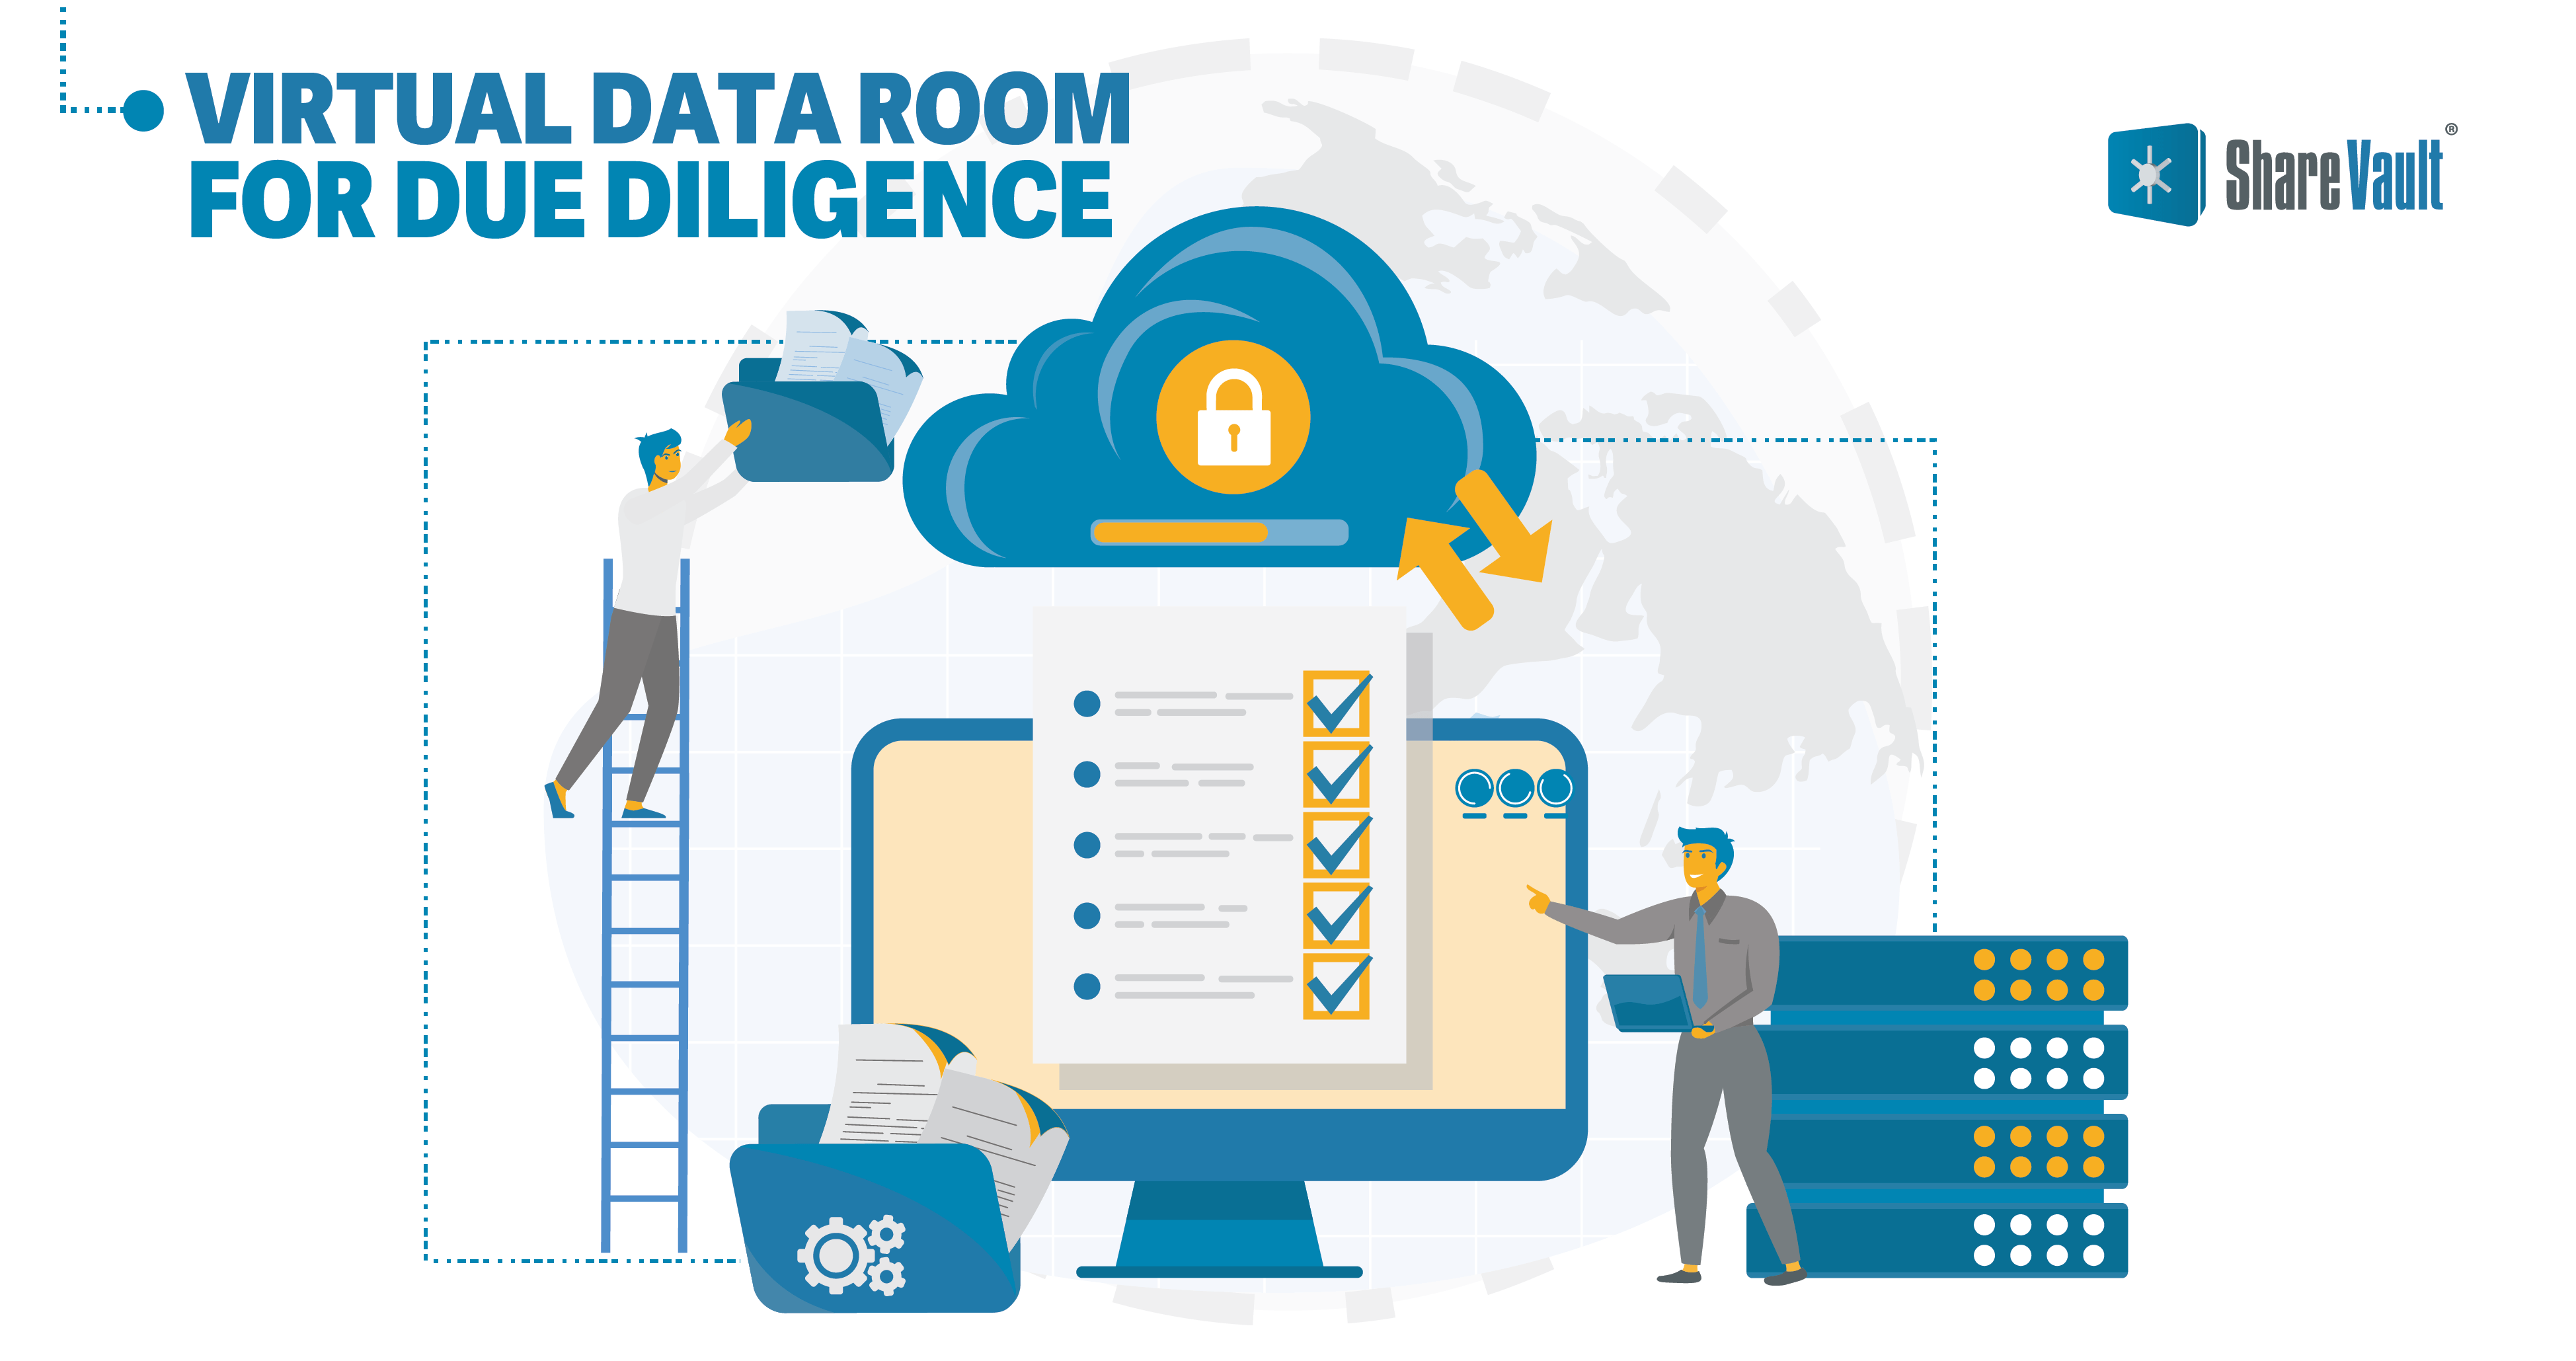 Virtual Data Room for Due Diligence